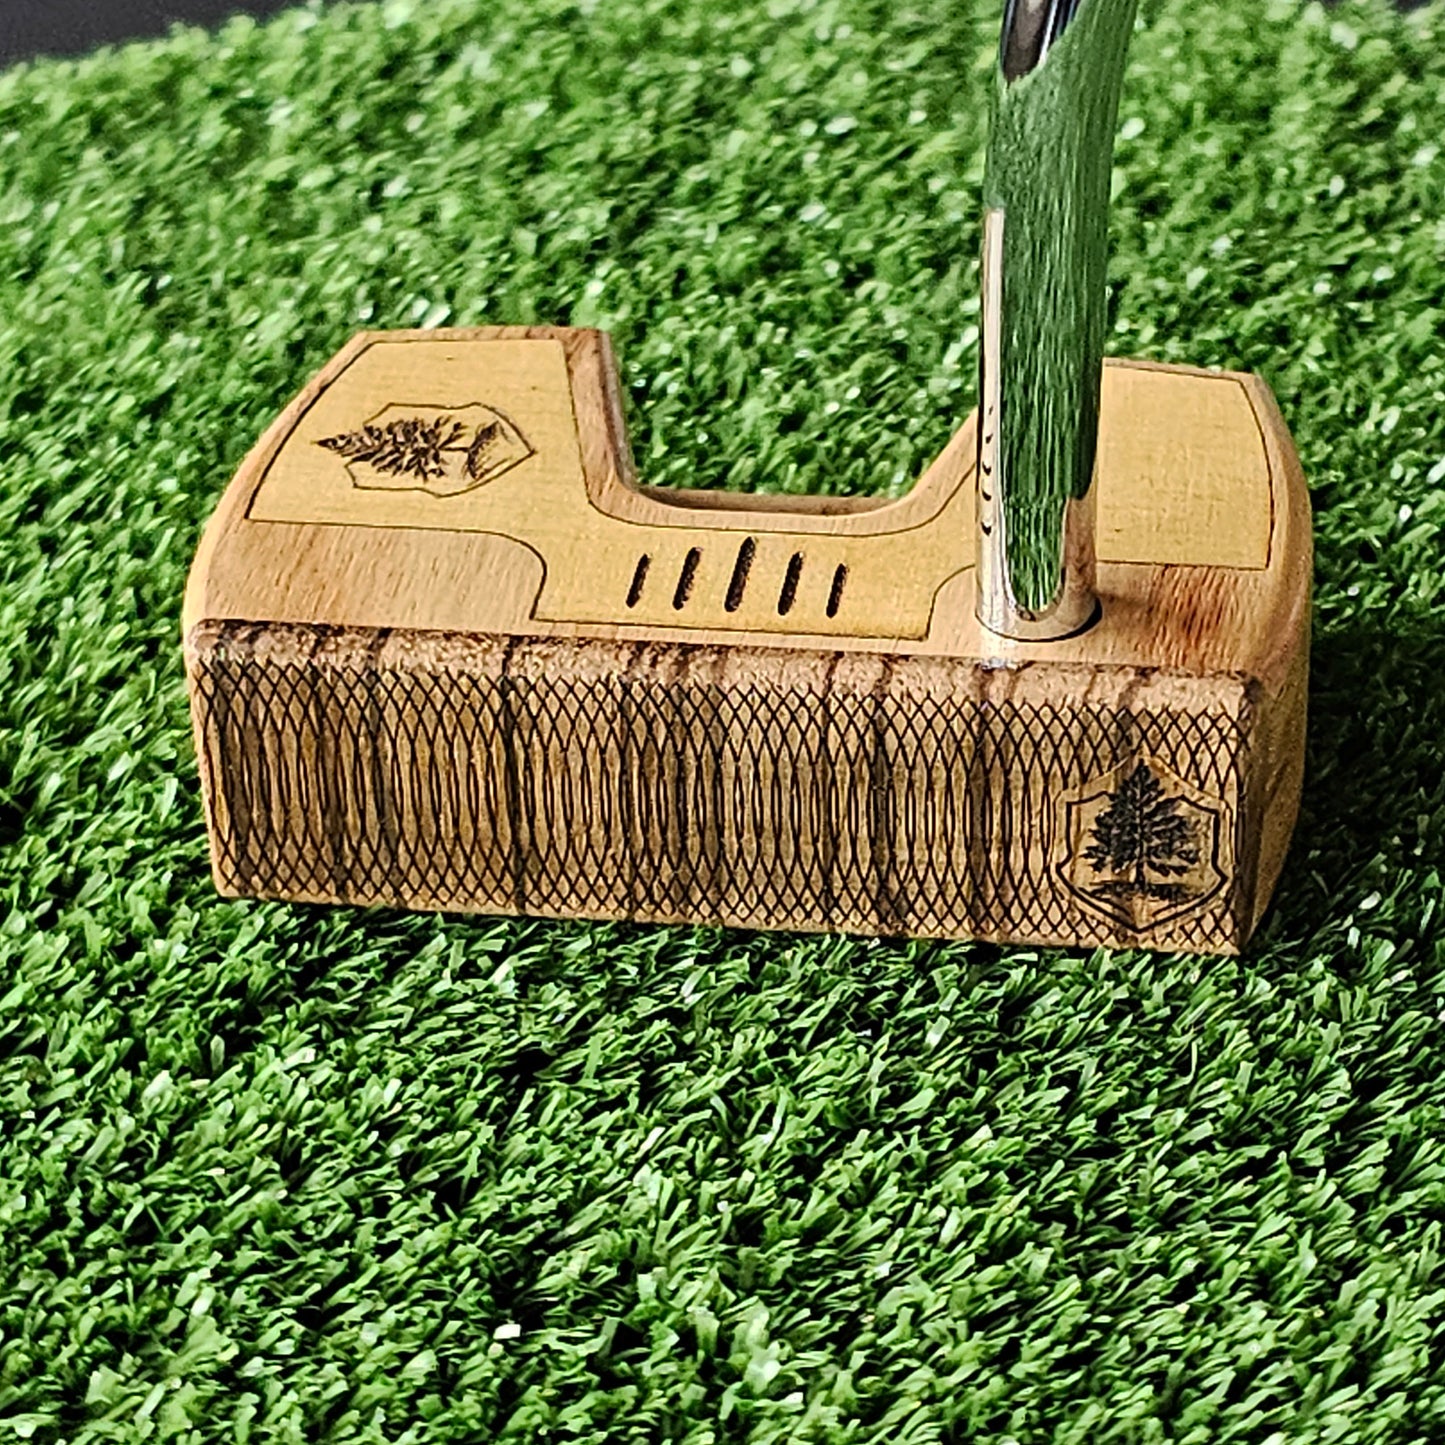 Zebrawood and Canarywood and Teak Woodrich Regal wood putter